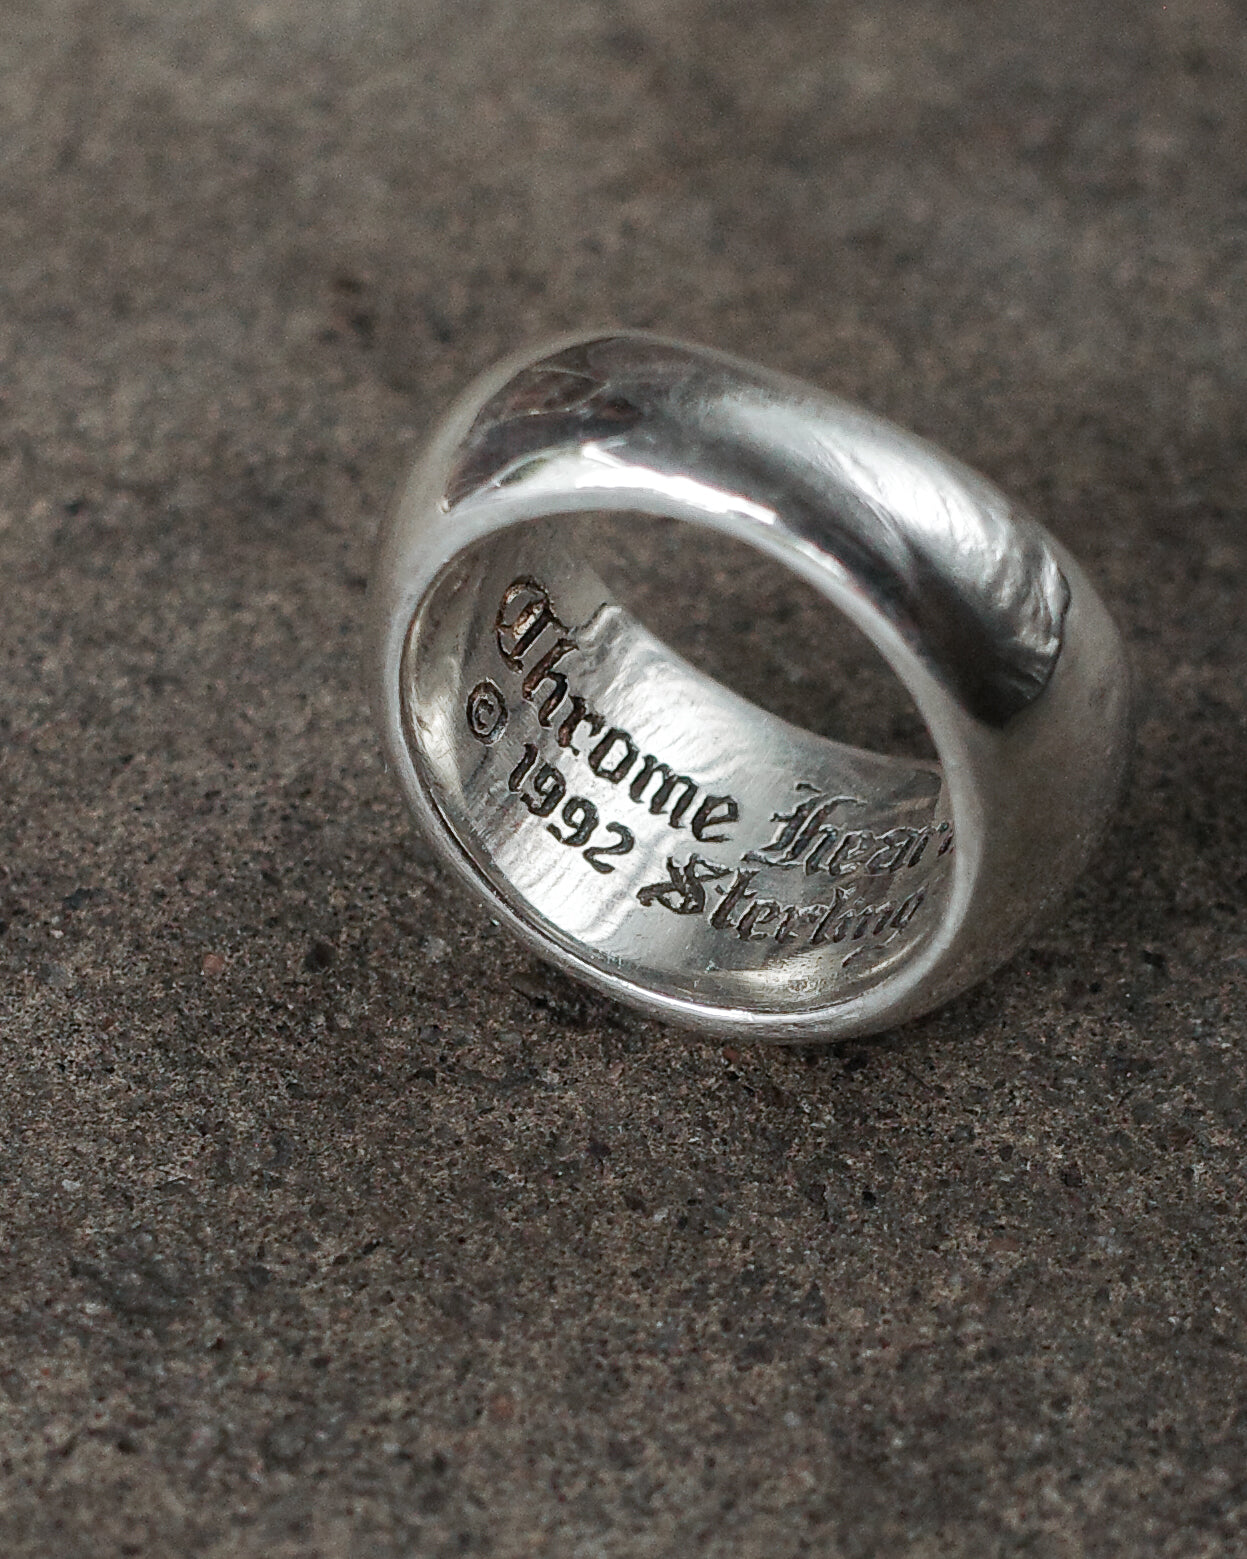 Chrome Hearts Seal Stamp Ring